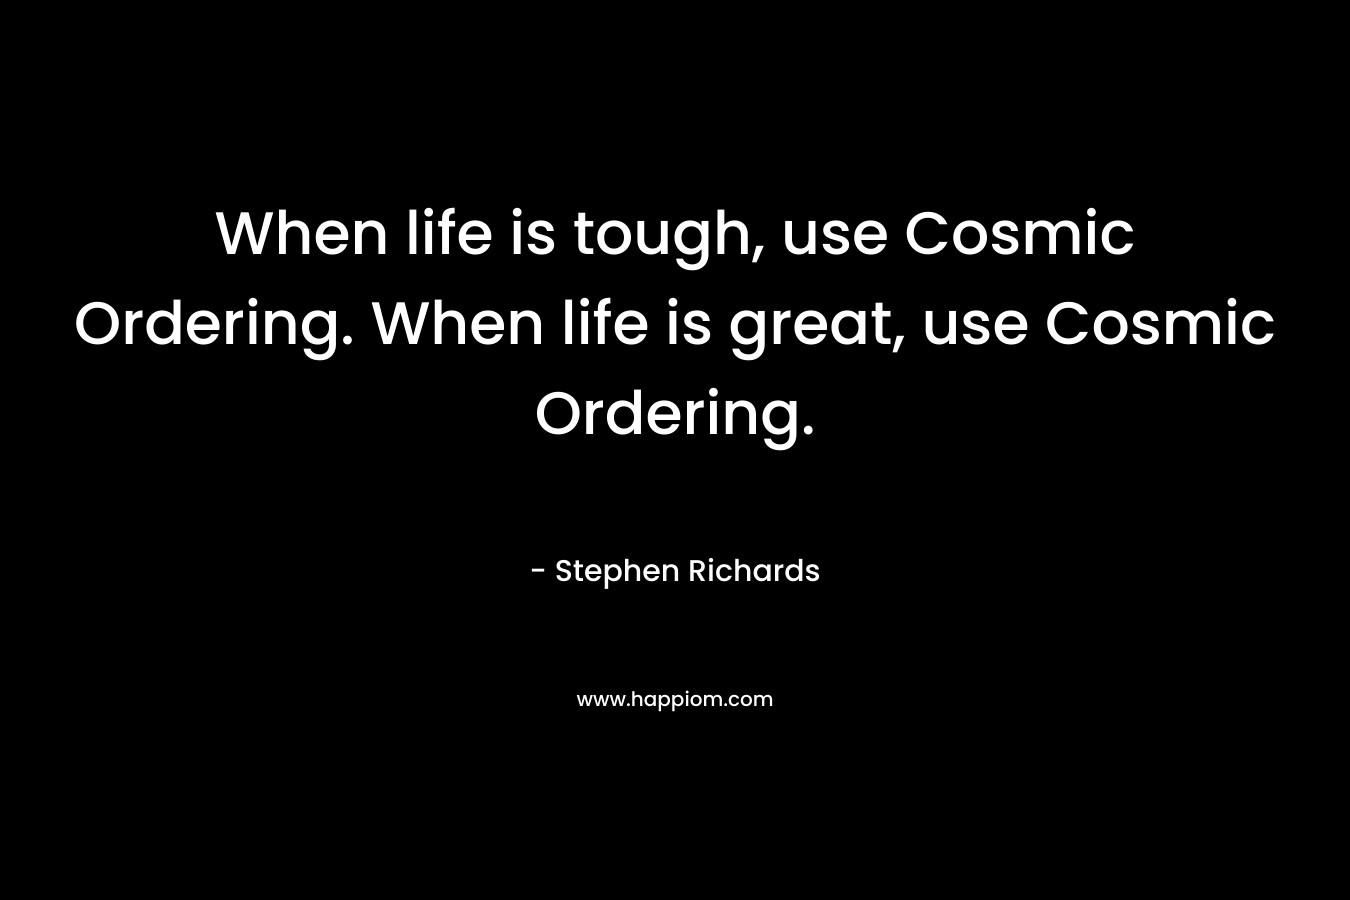 When life is tough, use Cosmic Ordering. When life is great, use Cosmic Ordering.